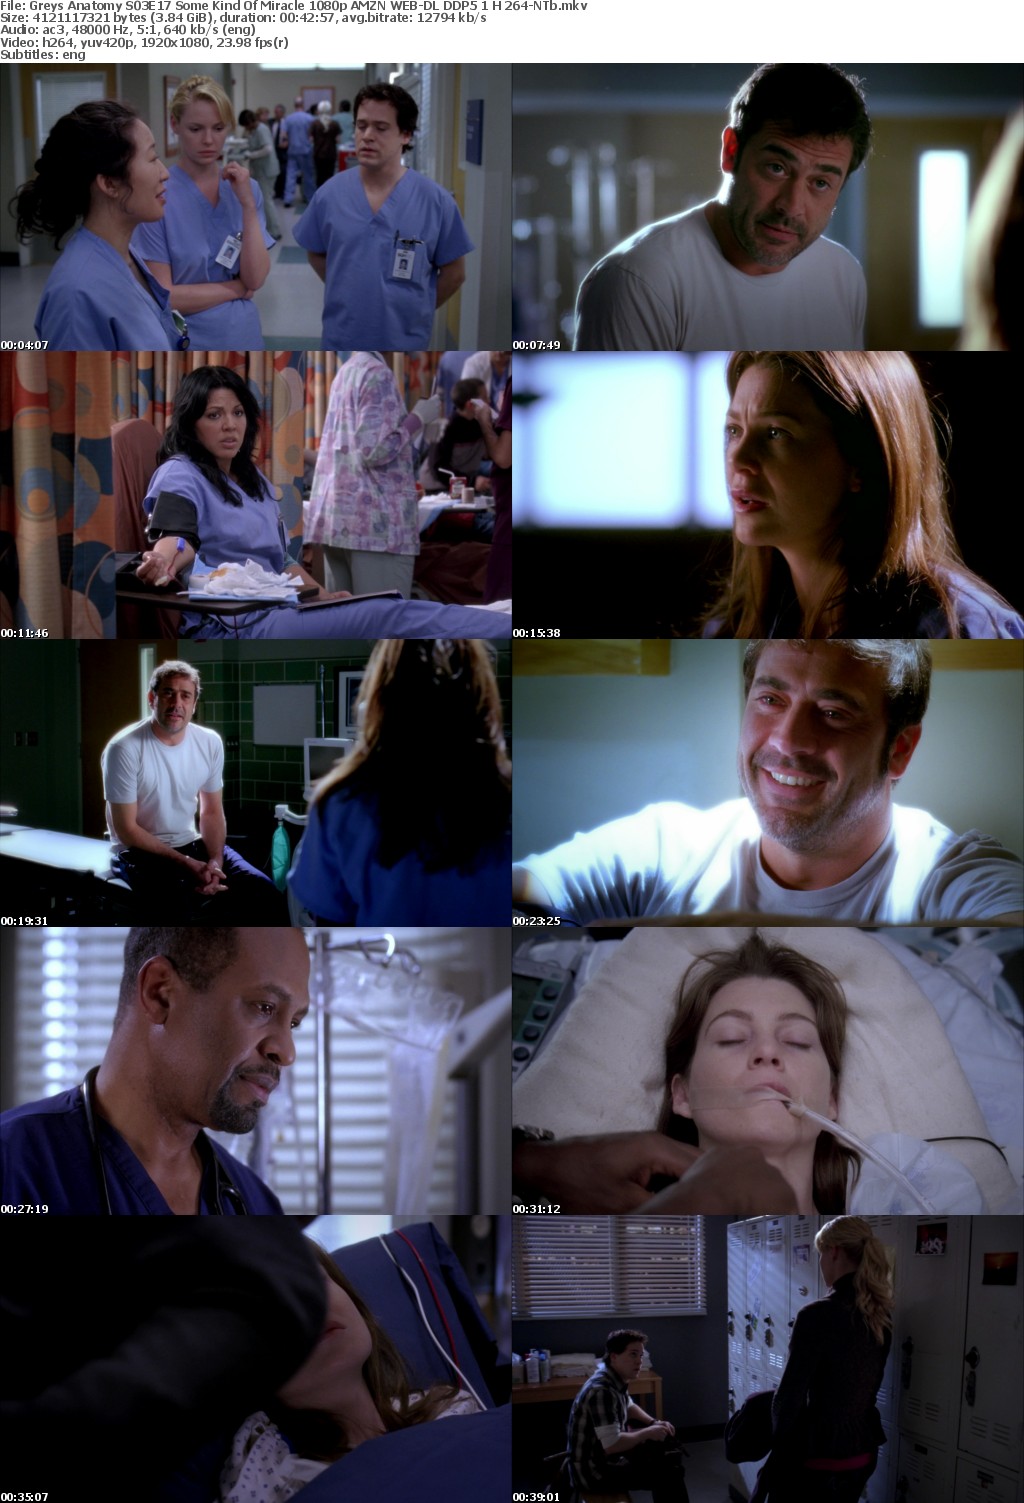 Greys Anatomy S03E17 Some Kind Of Miracle 1080p AMZN WEB-DL DDP5 1 H 264-NTb